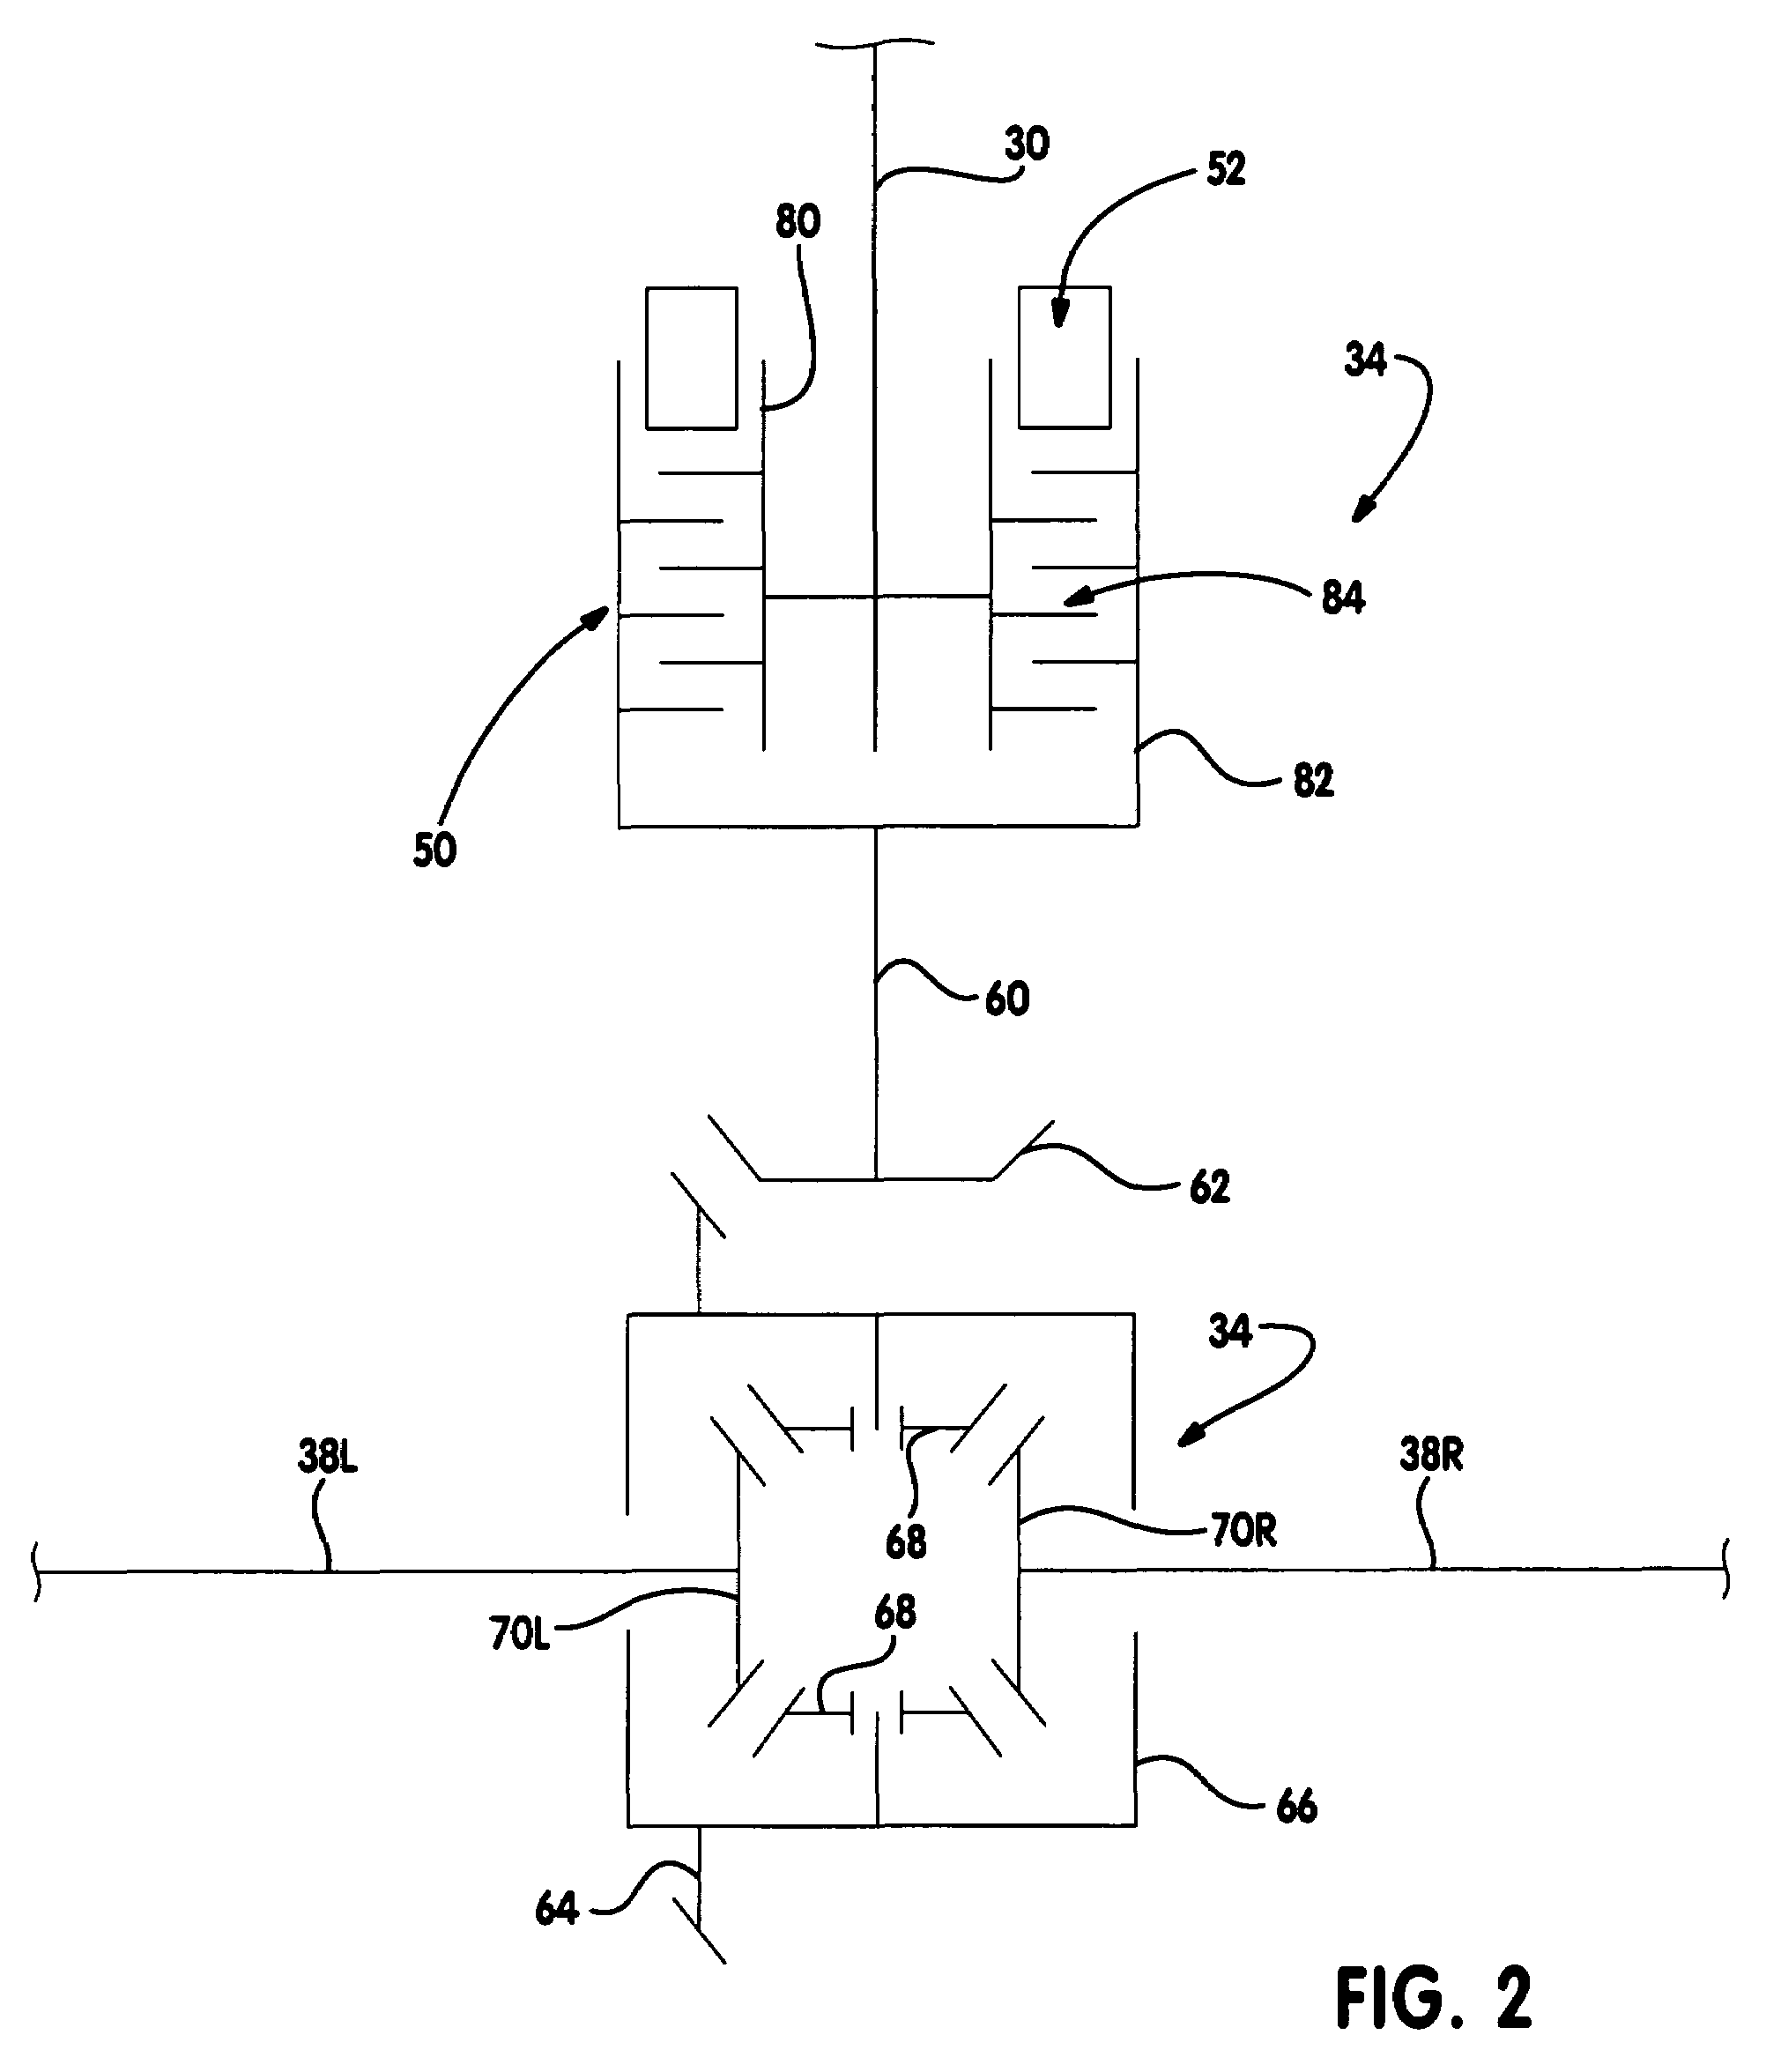 Power-operated clutch actuator for torque transfer mechanisms